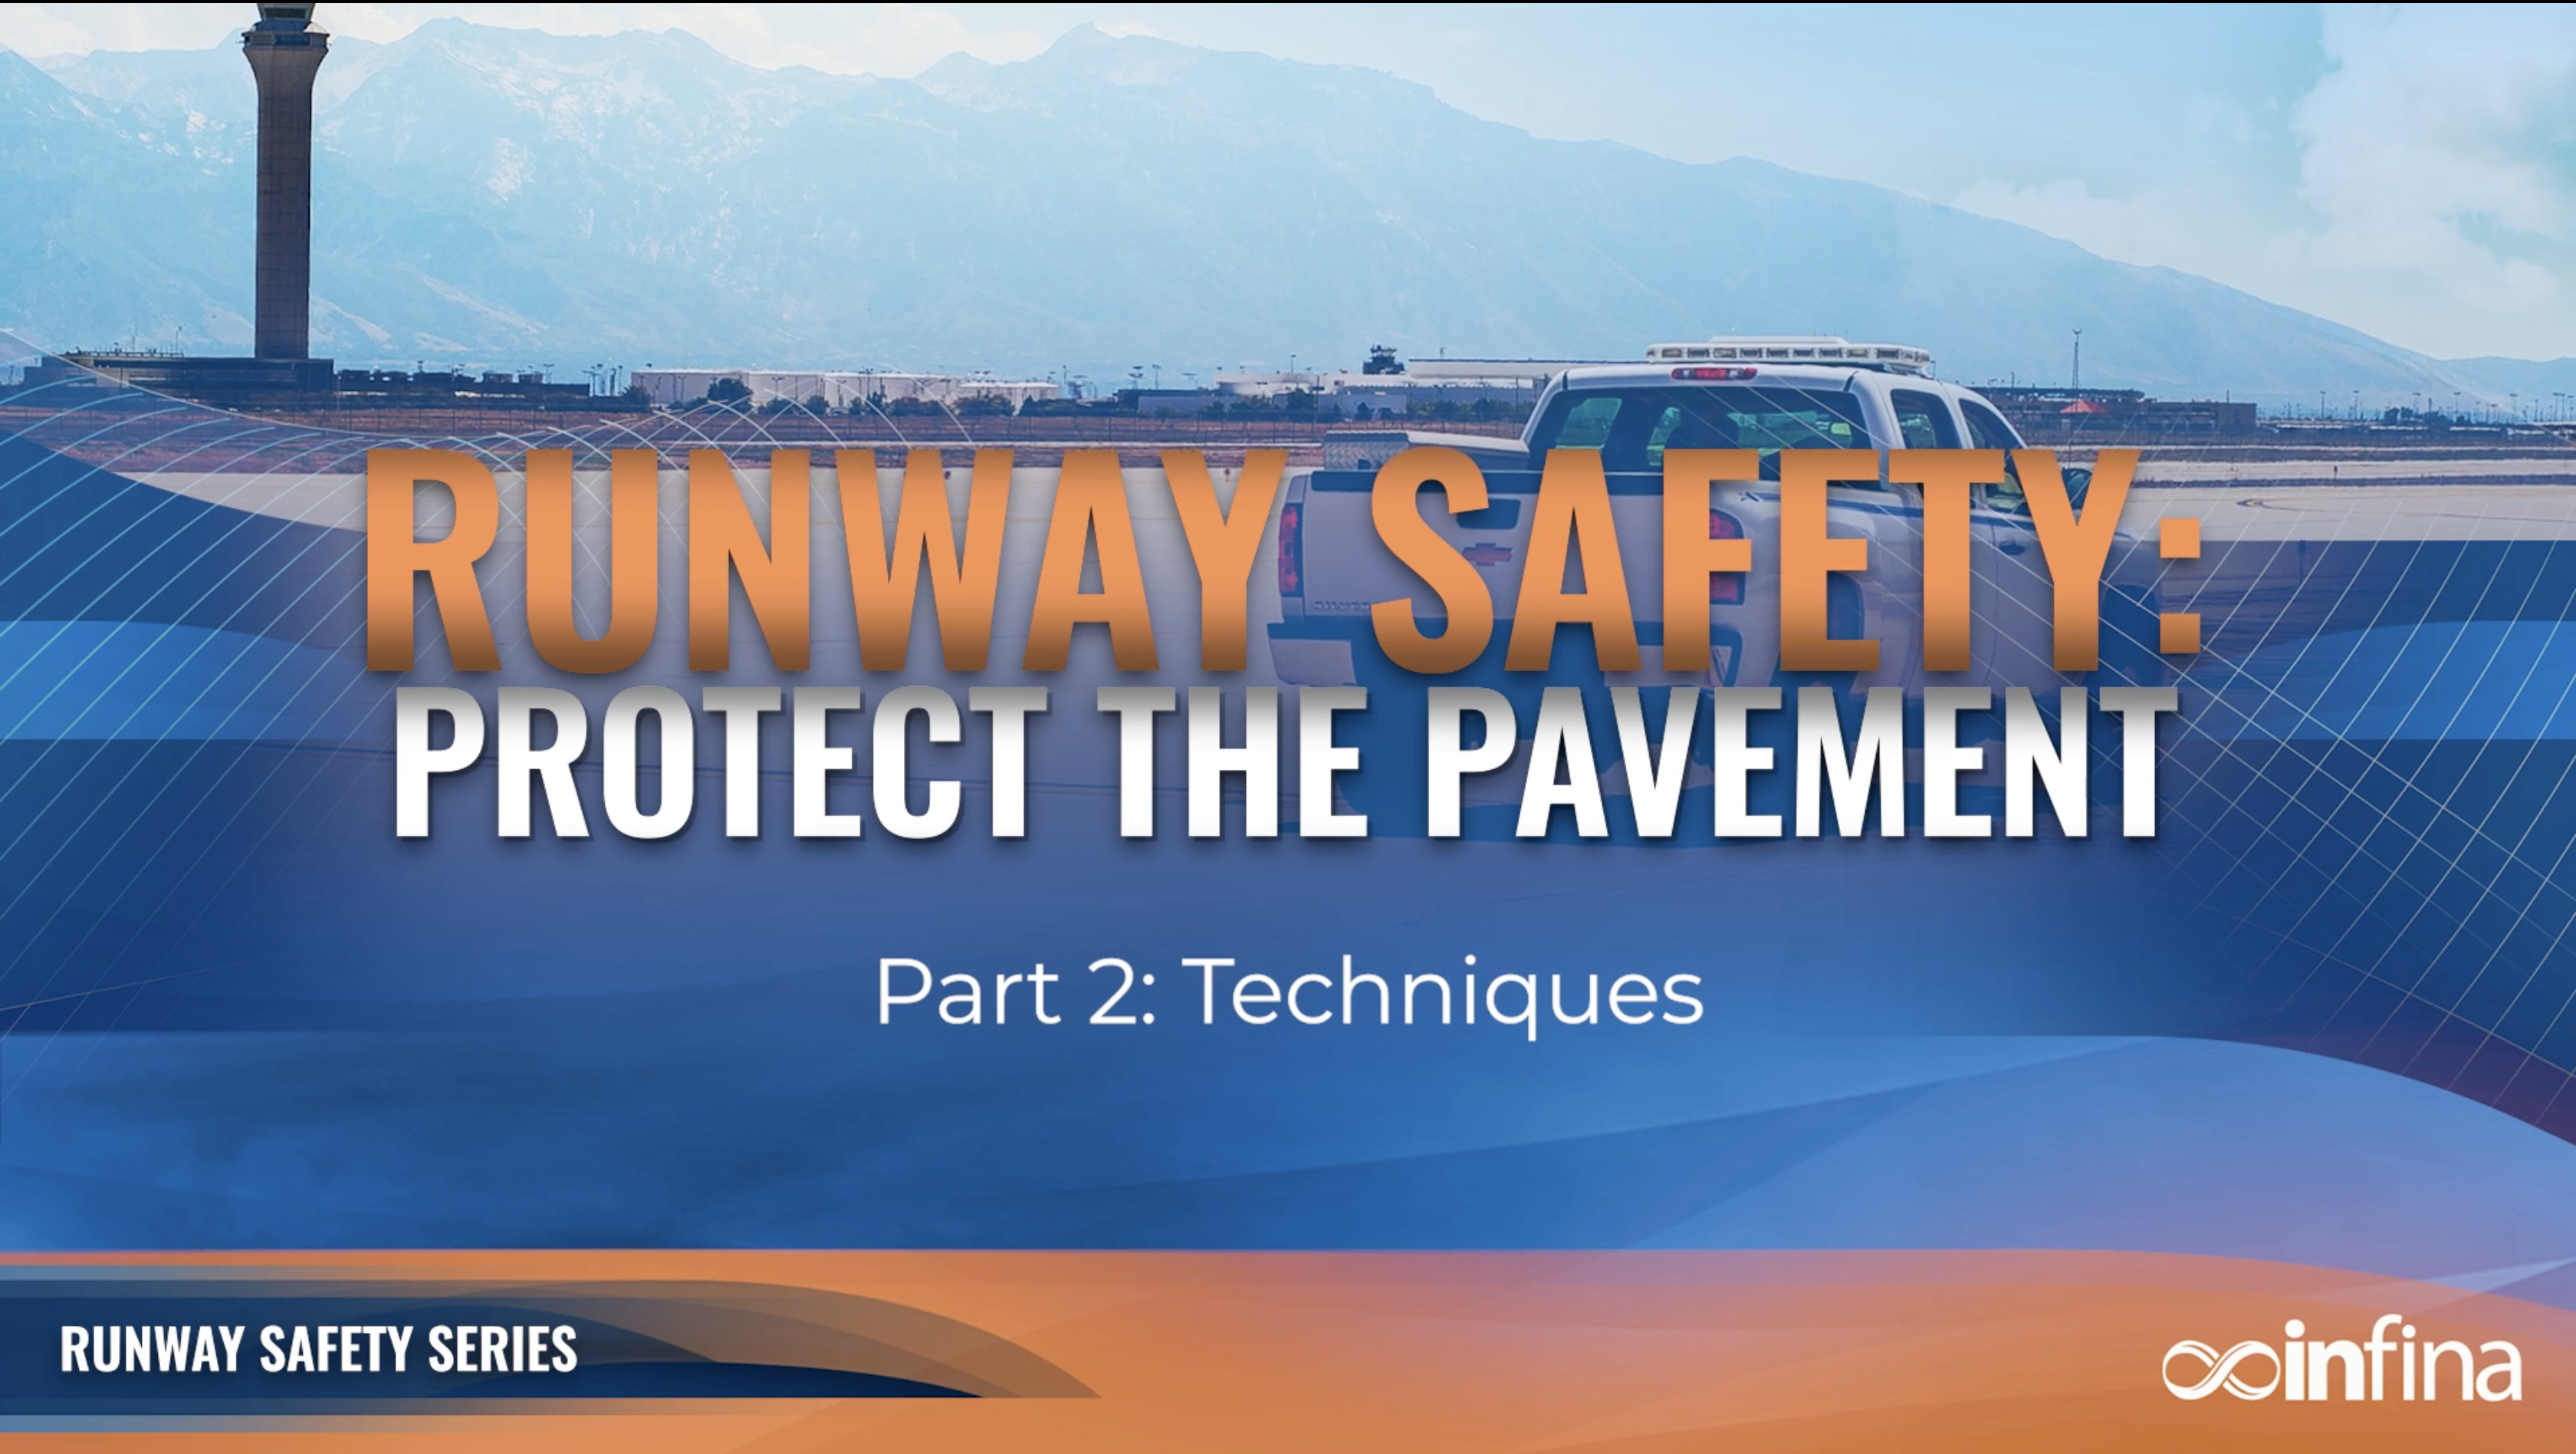 Runway Safety: Protect the Pavement Part 2 - Techniques